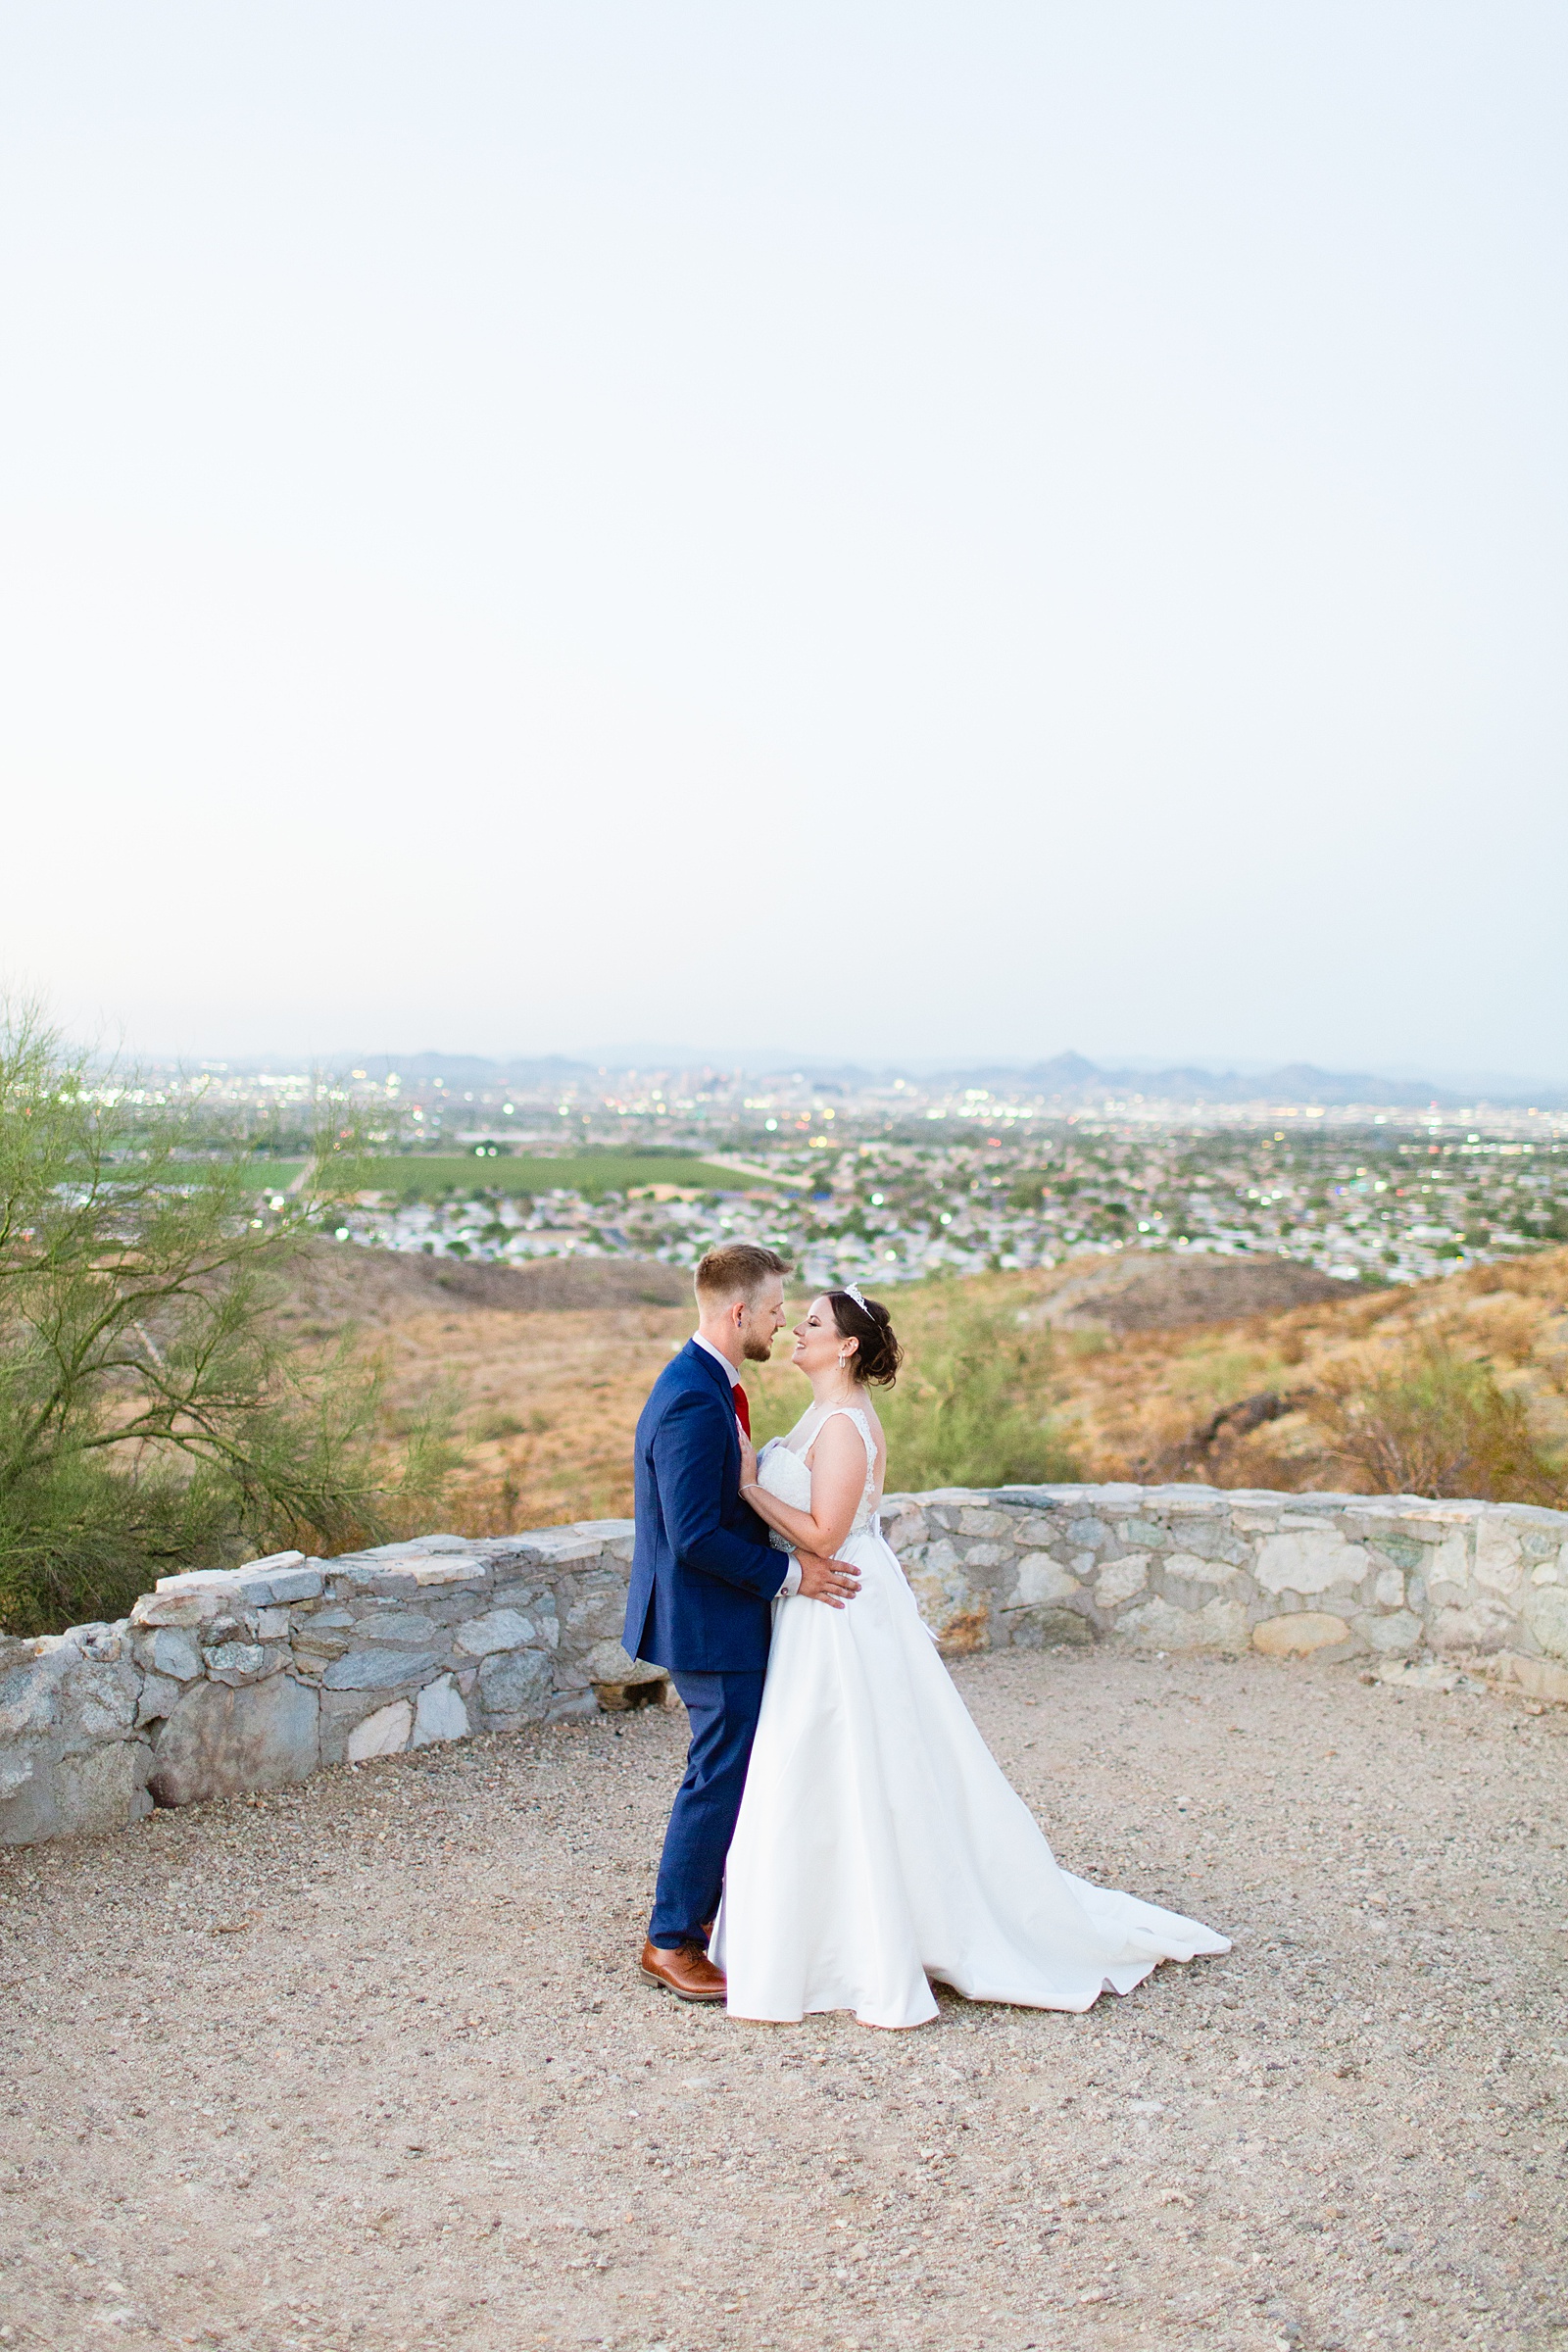 Bride and groom share an intimate moment during their intimate desert wedding by Phoenix wedding photographer Juniper and Co Photography.